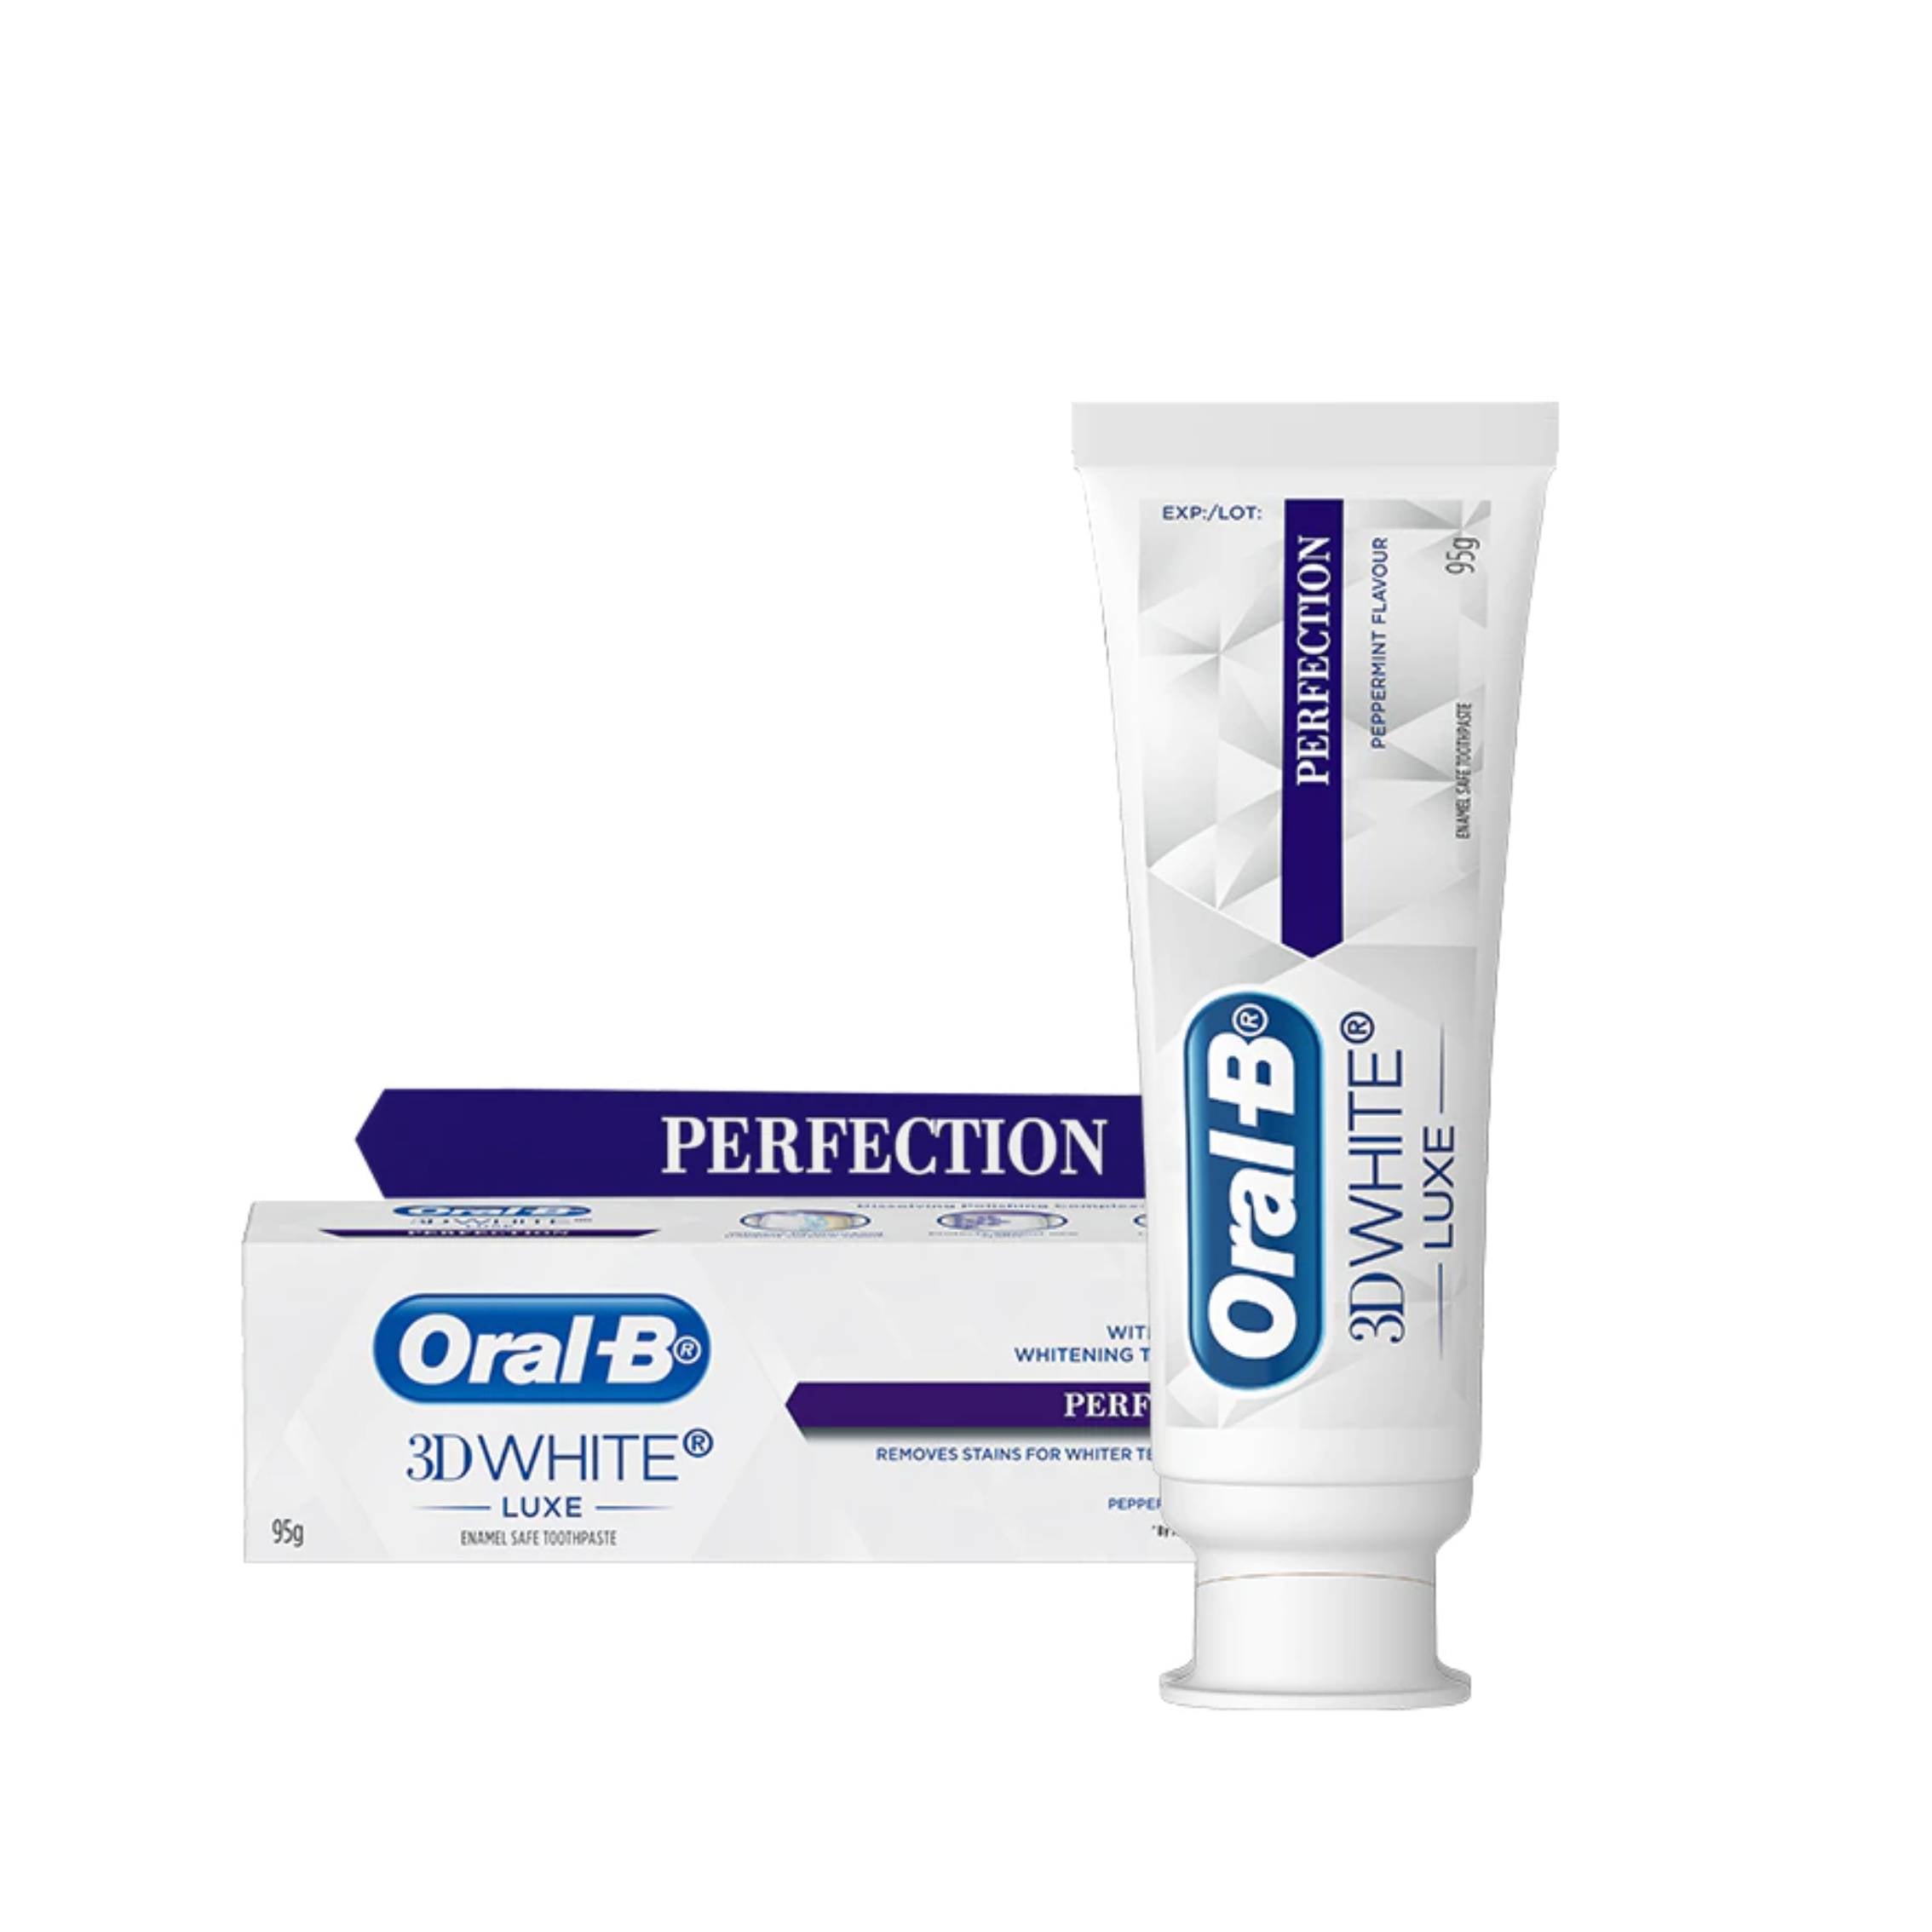 Oral B 3D White Lux Perfection Toothpaste 95g - DoctorOnCall Farmasi Online